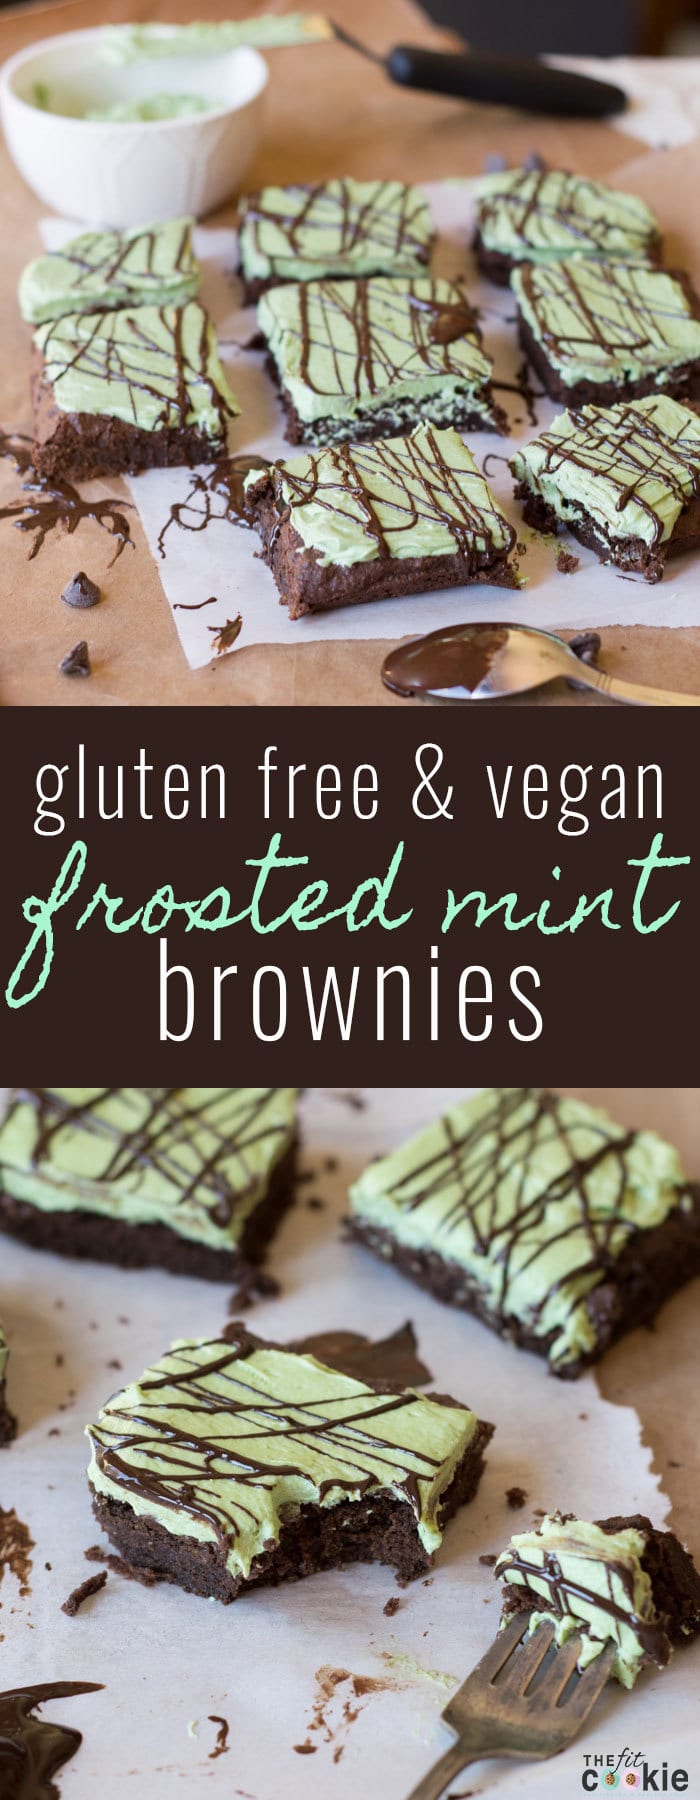 Gluten Free Frosted Mint Brownies (Vegan): Dense and chewy gluten-free mint brownies covered with naturally colored mint frosting - these are AMAZING!! - @TheFitCookie